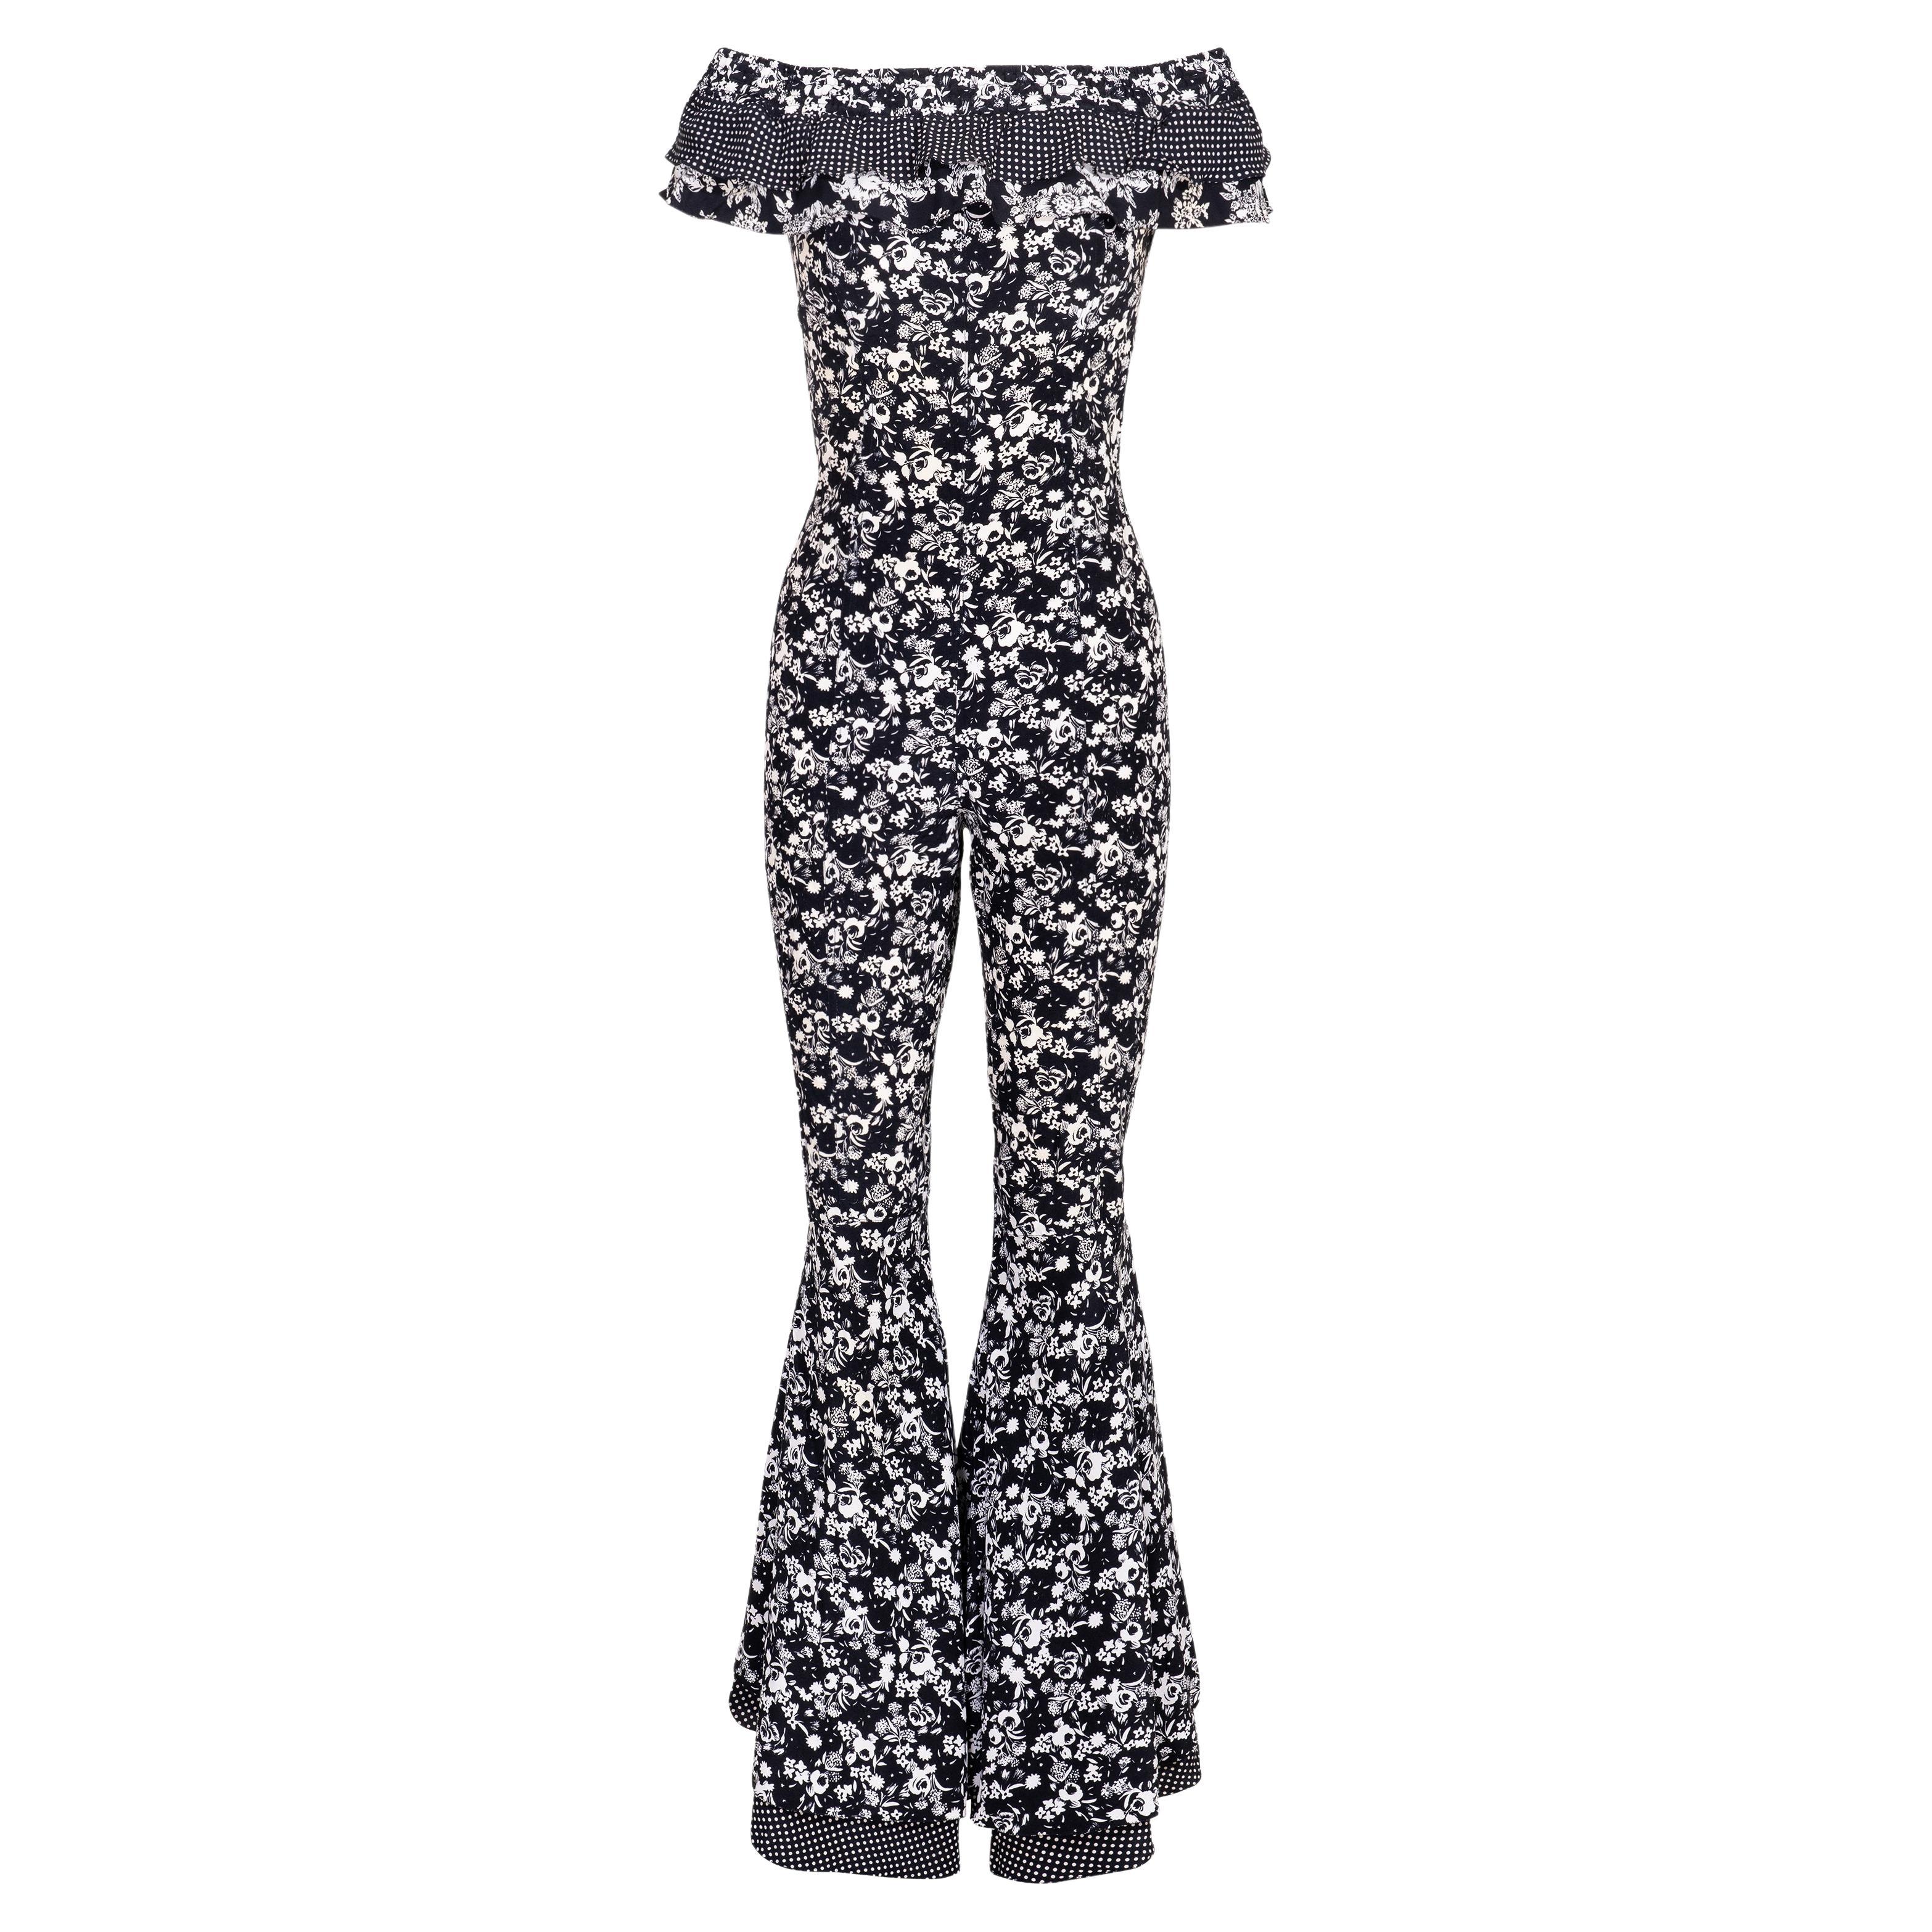 S/S 1993 Gianni Versace Floral and Polka Dot Pattern Bell-Bottom Jumpsuit For Sale